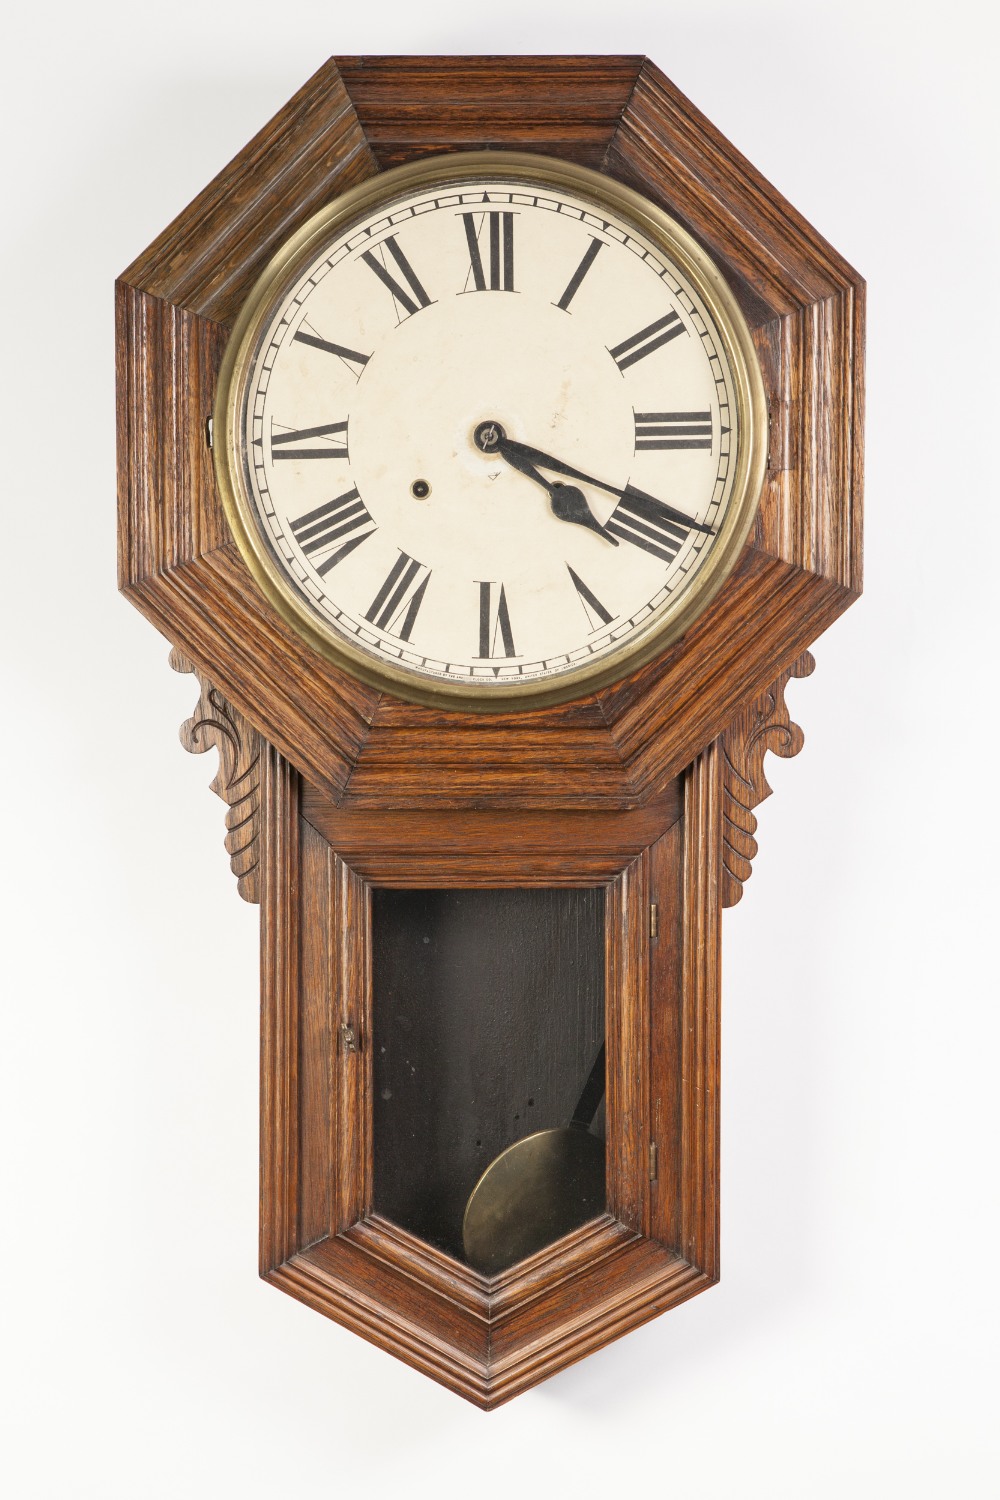 EARLY TWENTIETH CENTURY ANSONIA DROP DIAL WALL CLOCK, of typical form with 11" Roman dial and spring